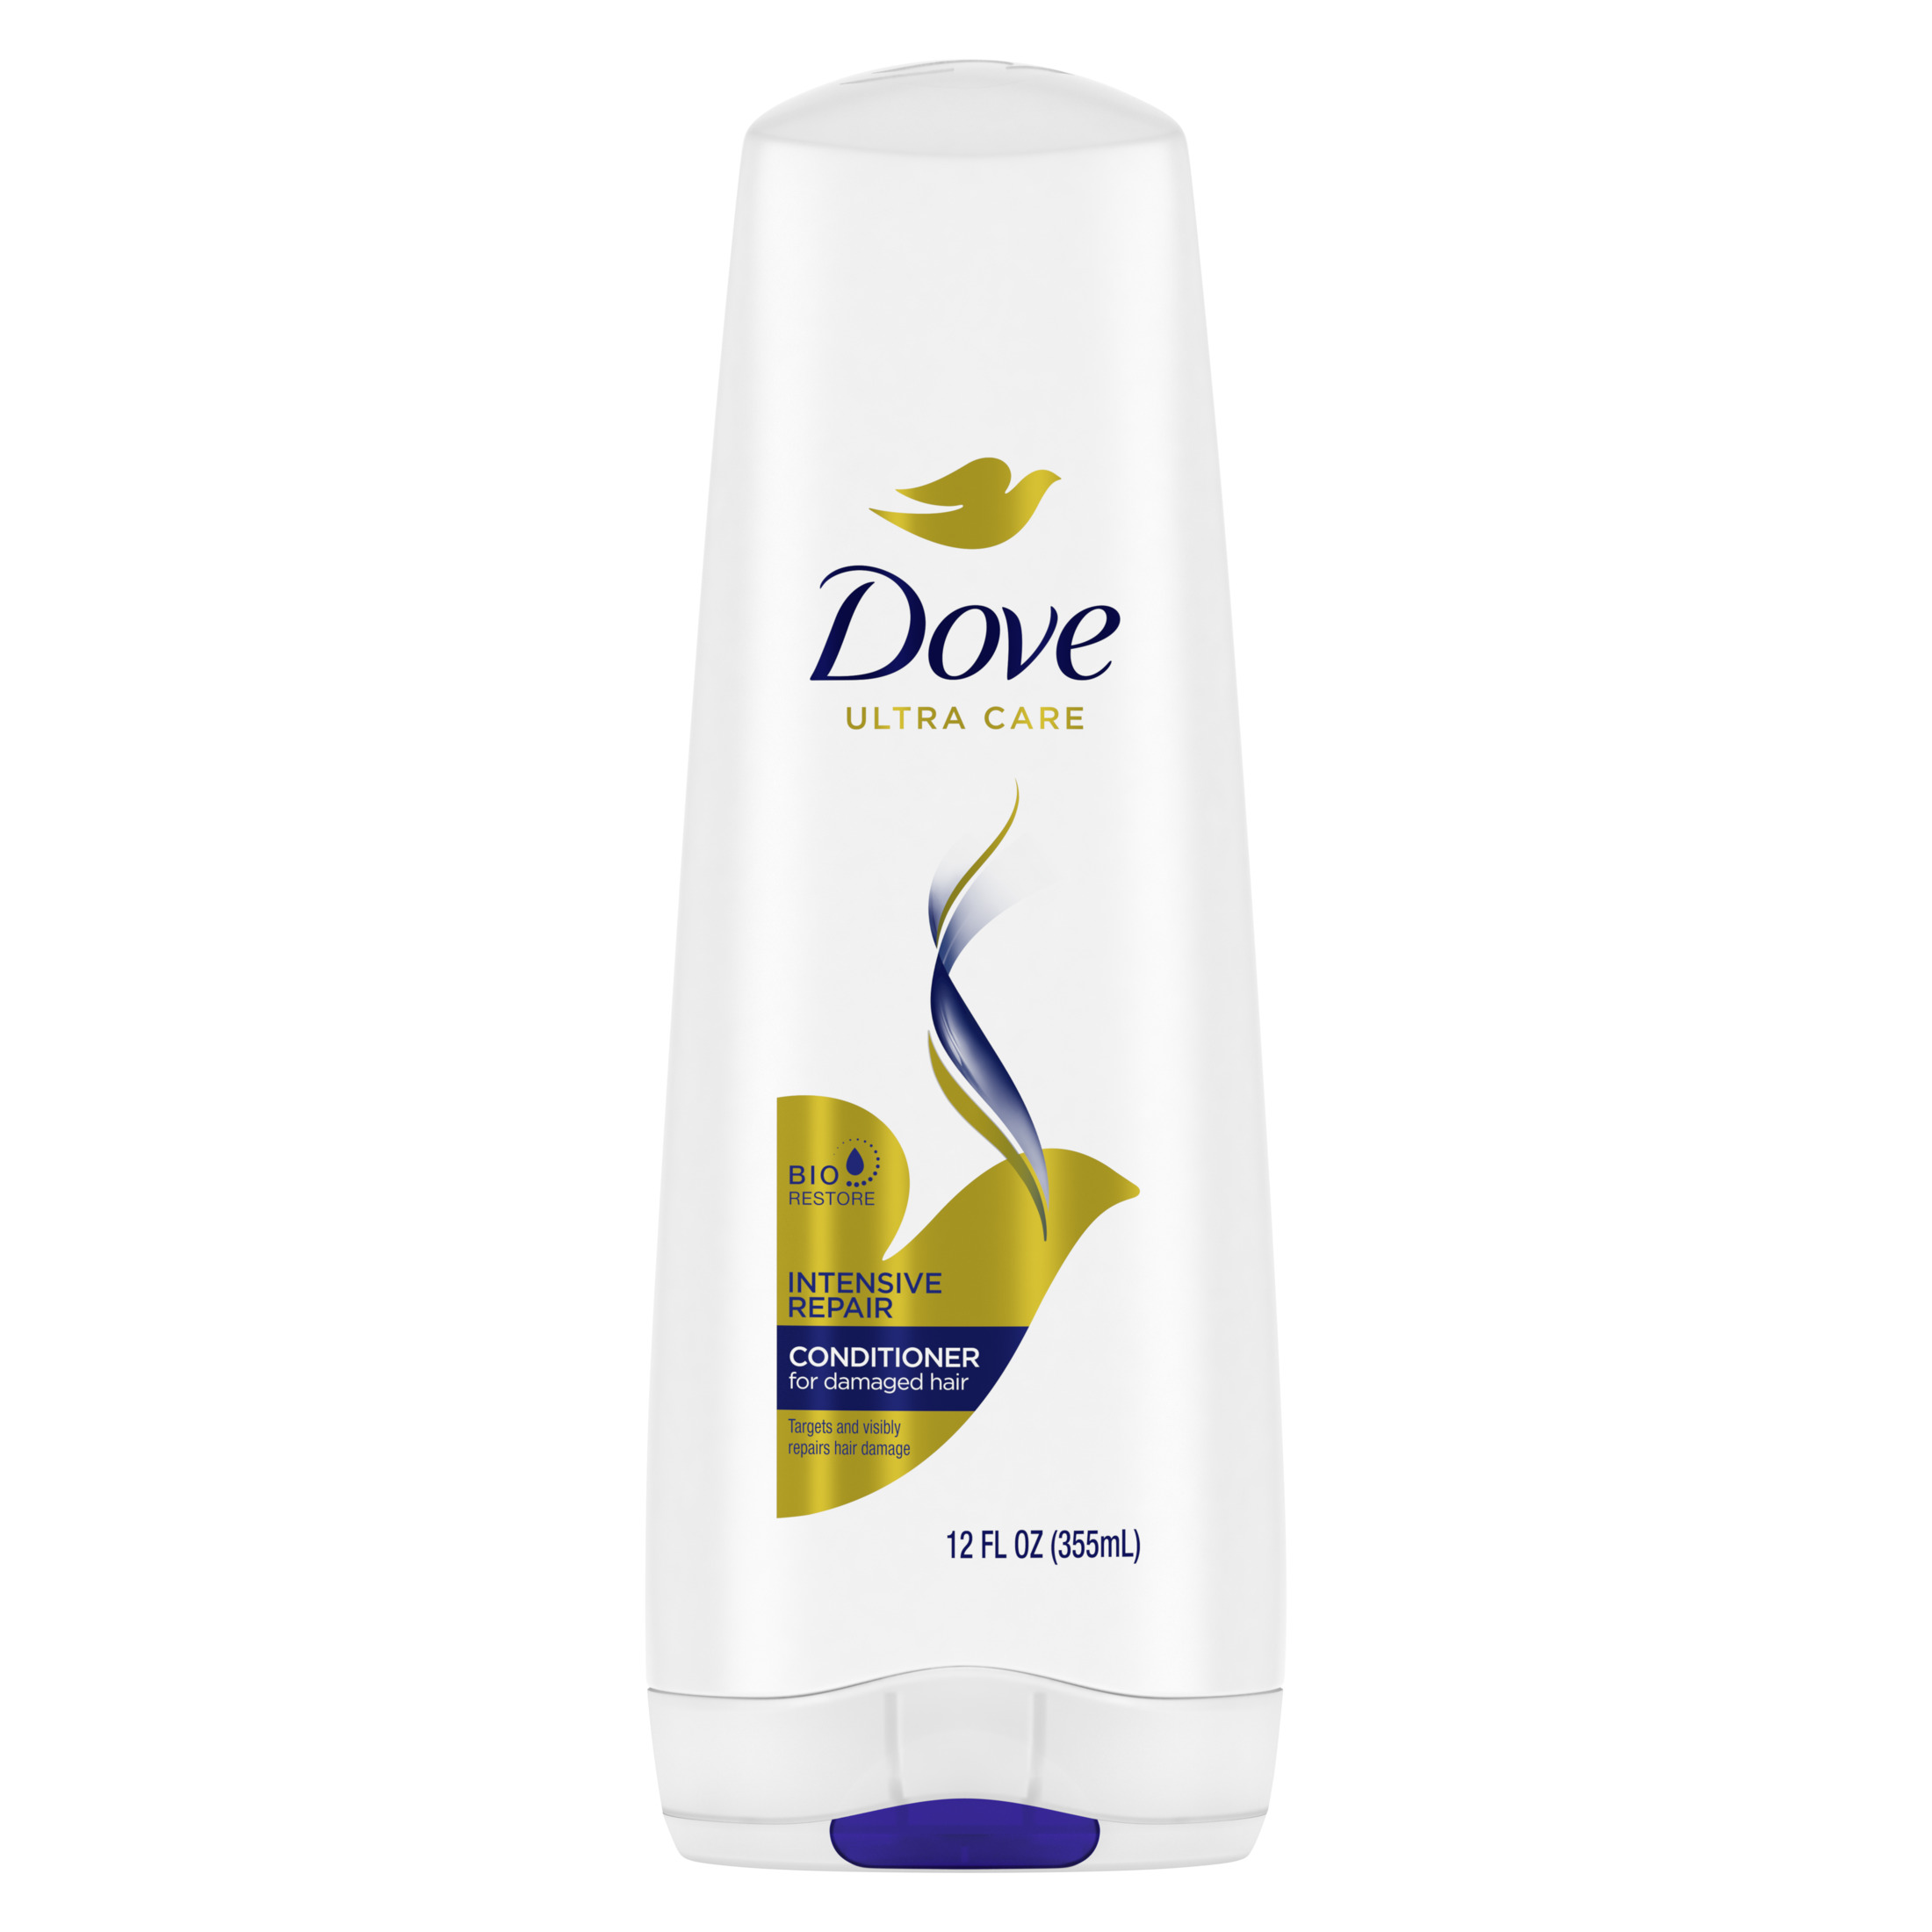 Dove Ultra Care Intensive Repair Deep Conditioner for Damaged Hair, with Keratin, 12 fl oz - image 1 of 8